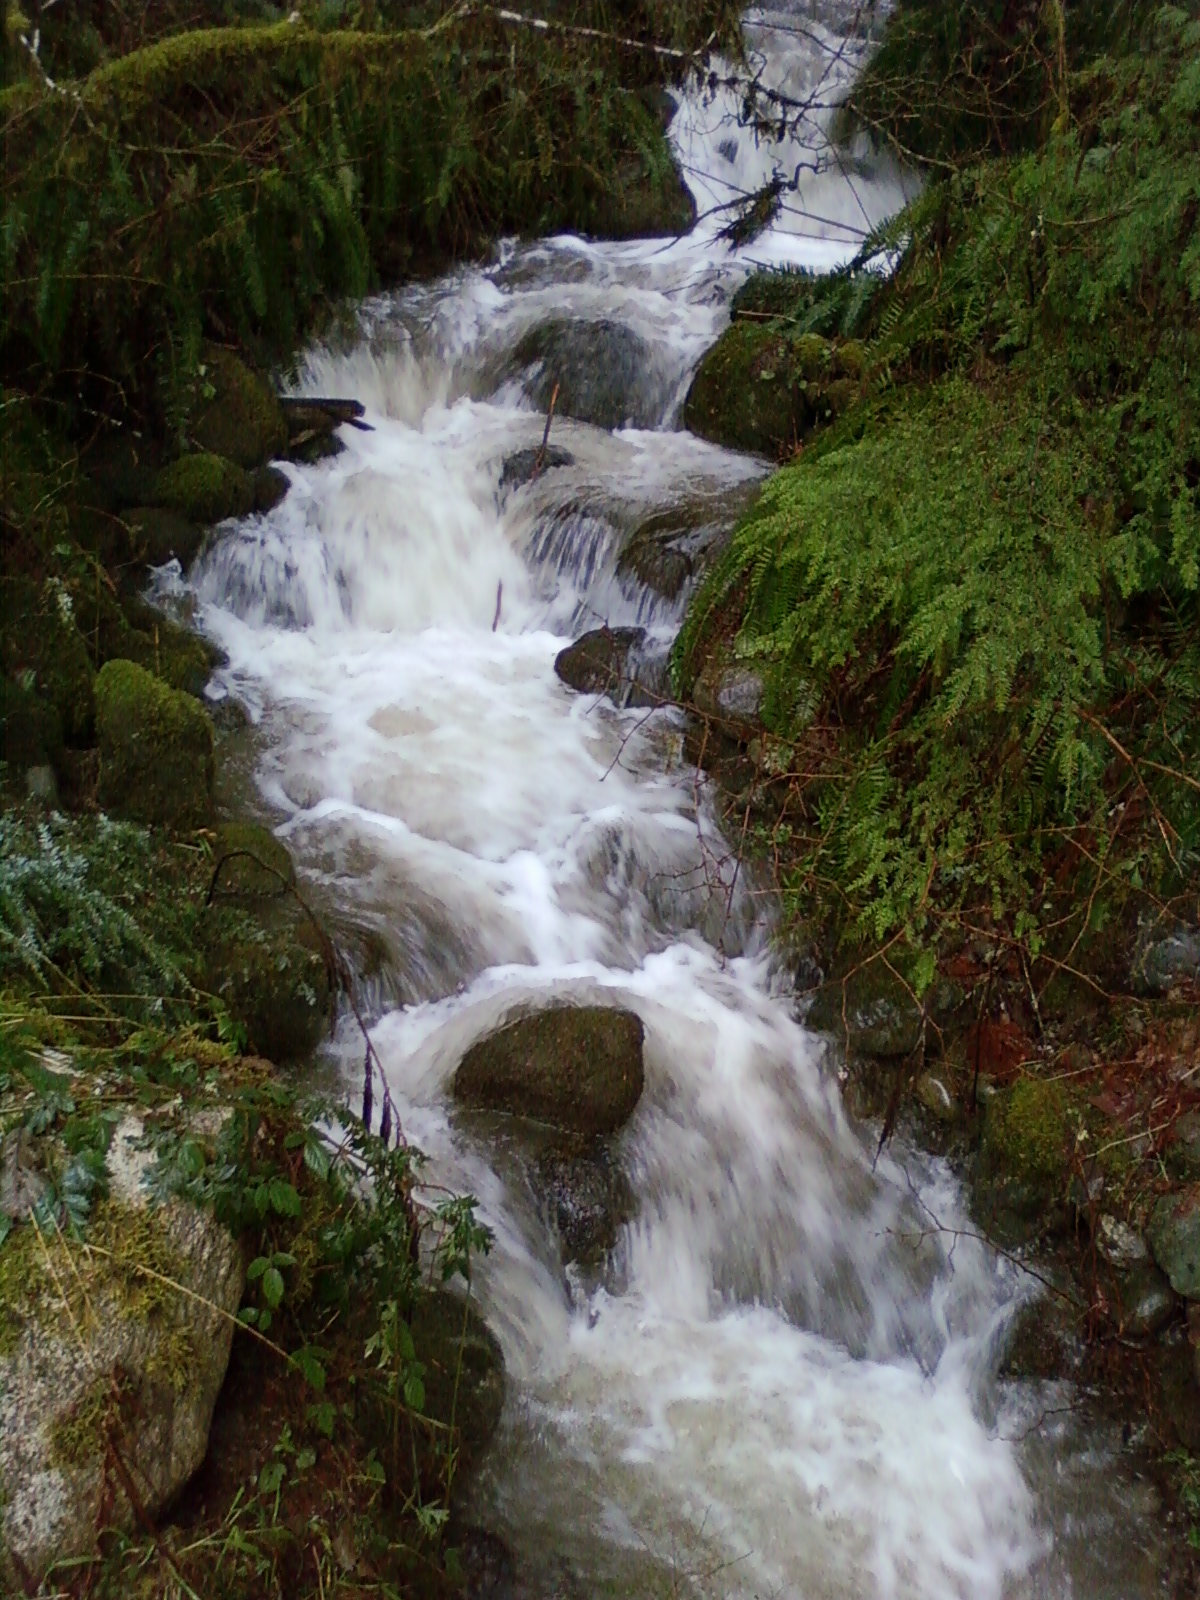 The stream in the front yard